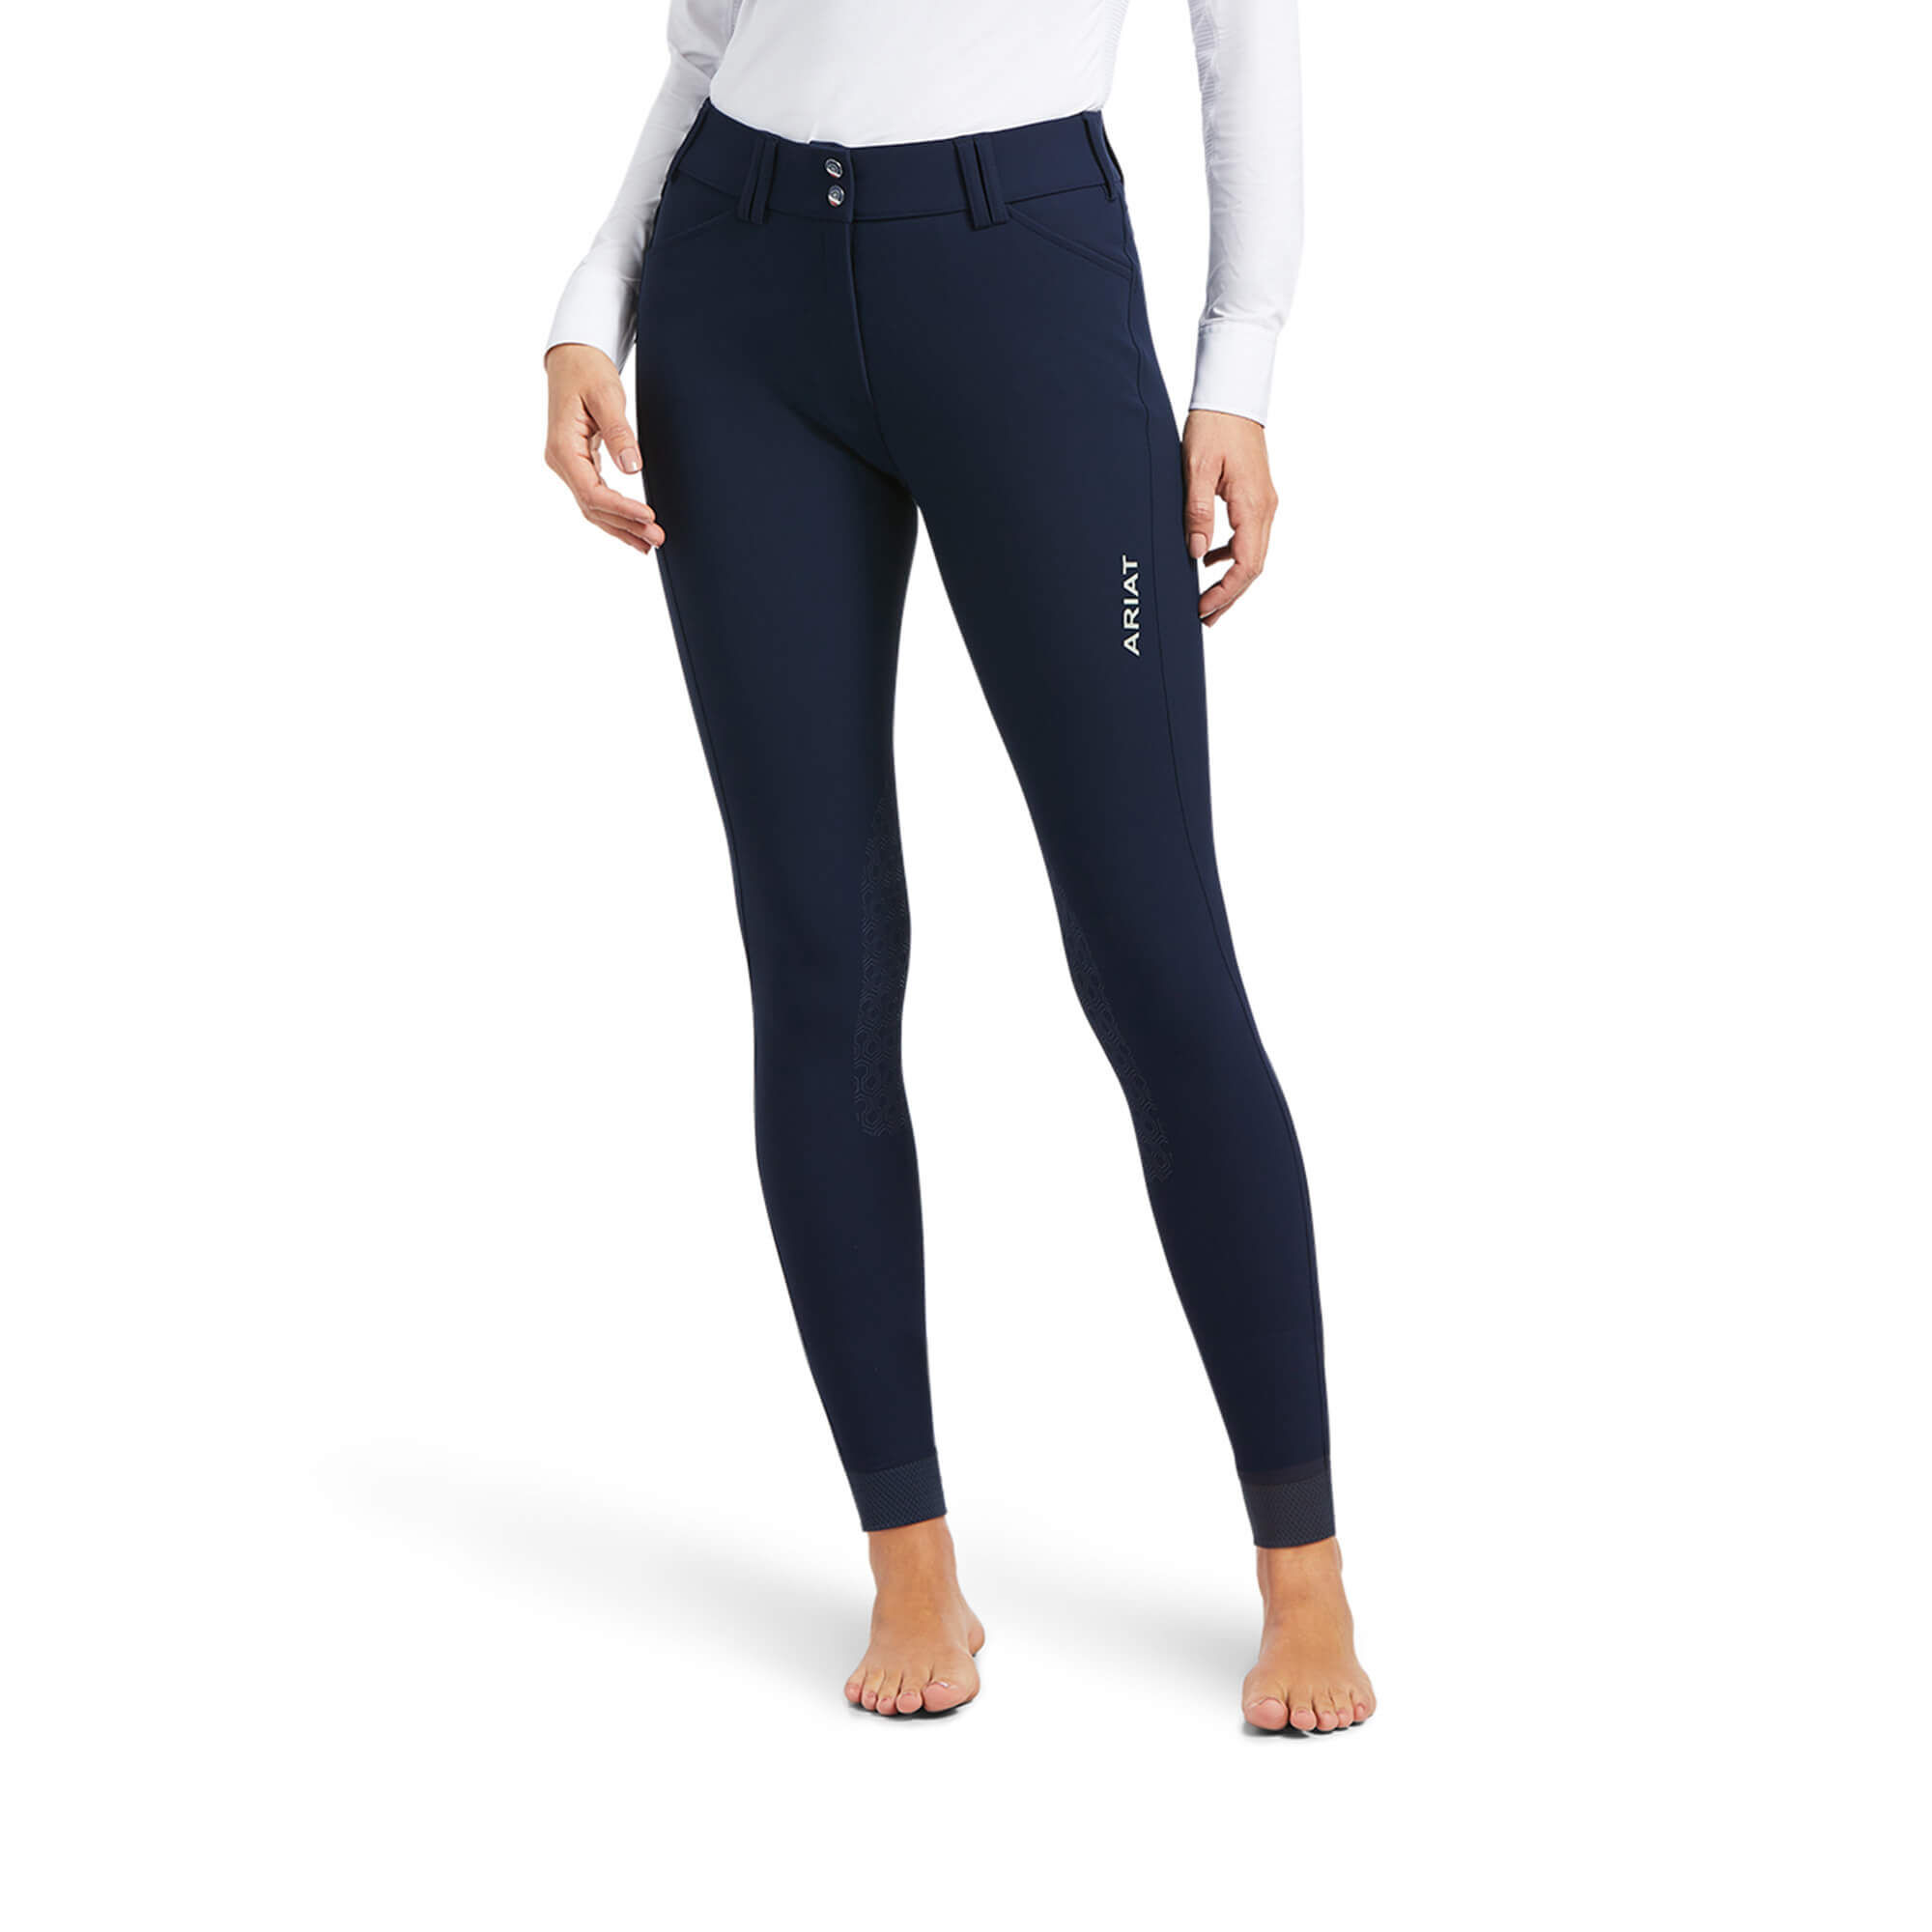 Women's Breeches and Tights | Ariat